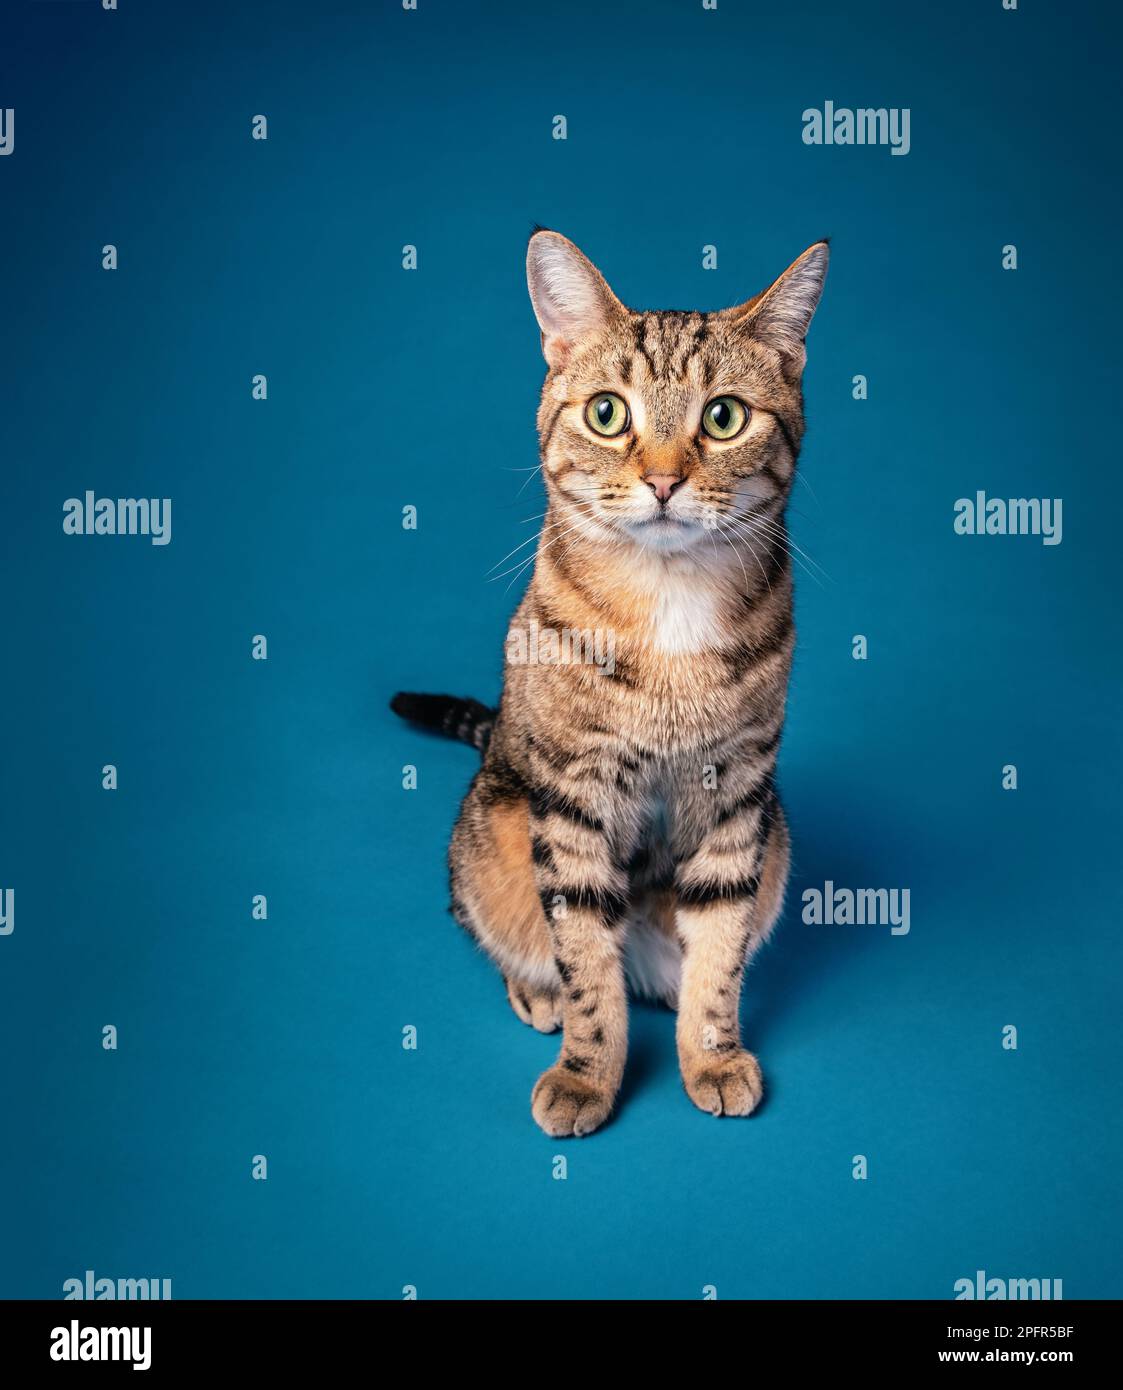 Funny Nervous Adult domestic short hair striped tabby cat sitting on a seamless blue background. Stock Photo